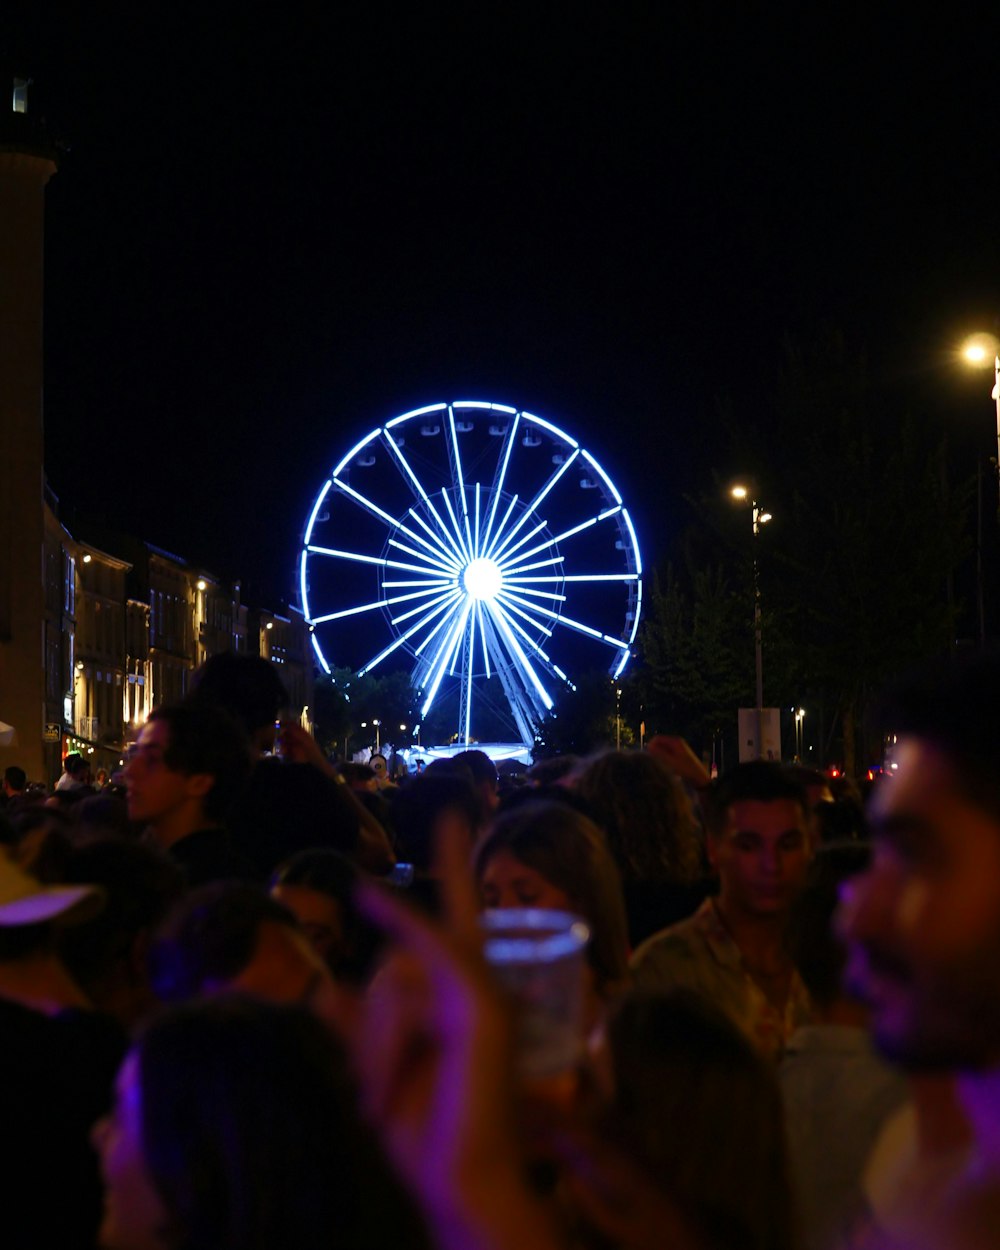 a crowd of people standing around a ferris wheel at night